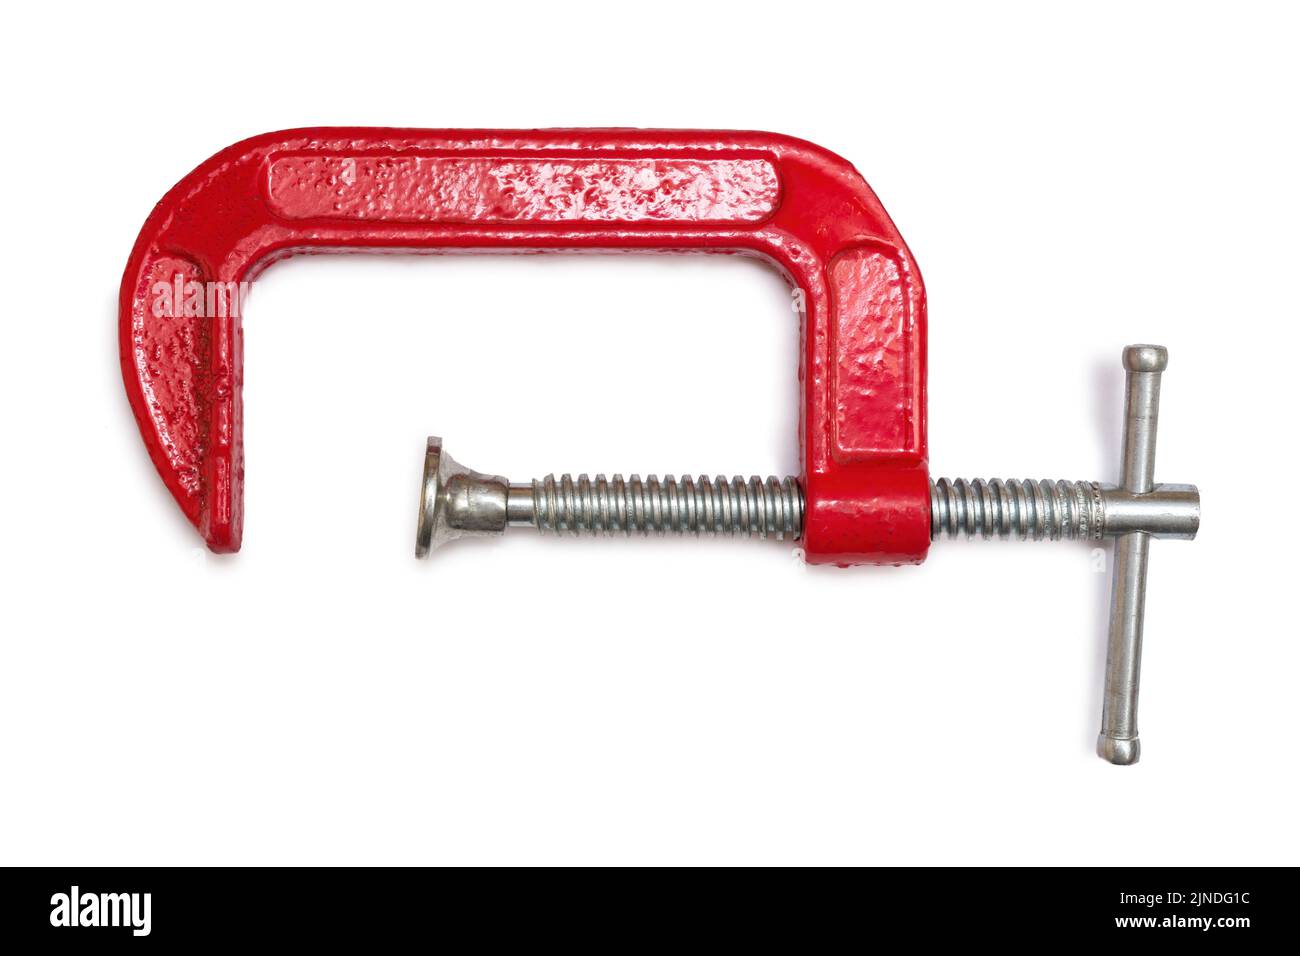 Red steel clamp tool isolated on white background Stock Photo